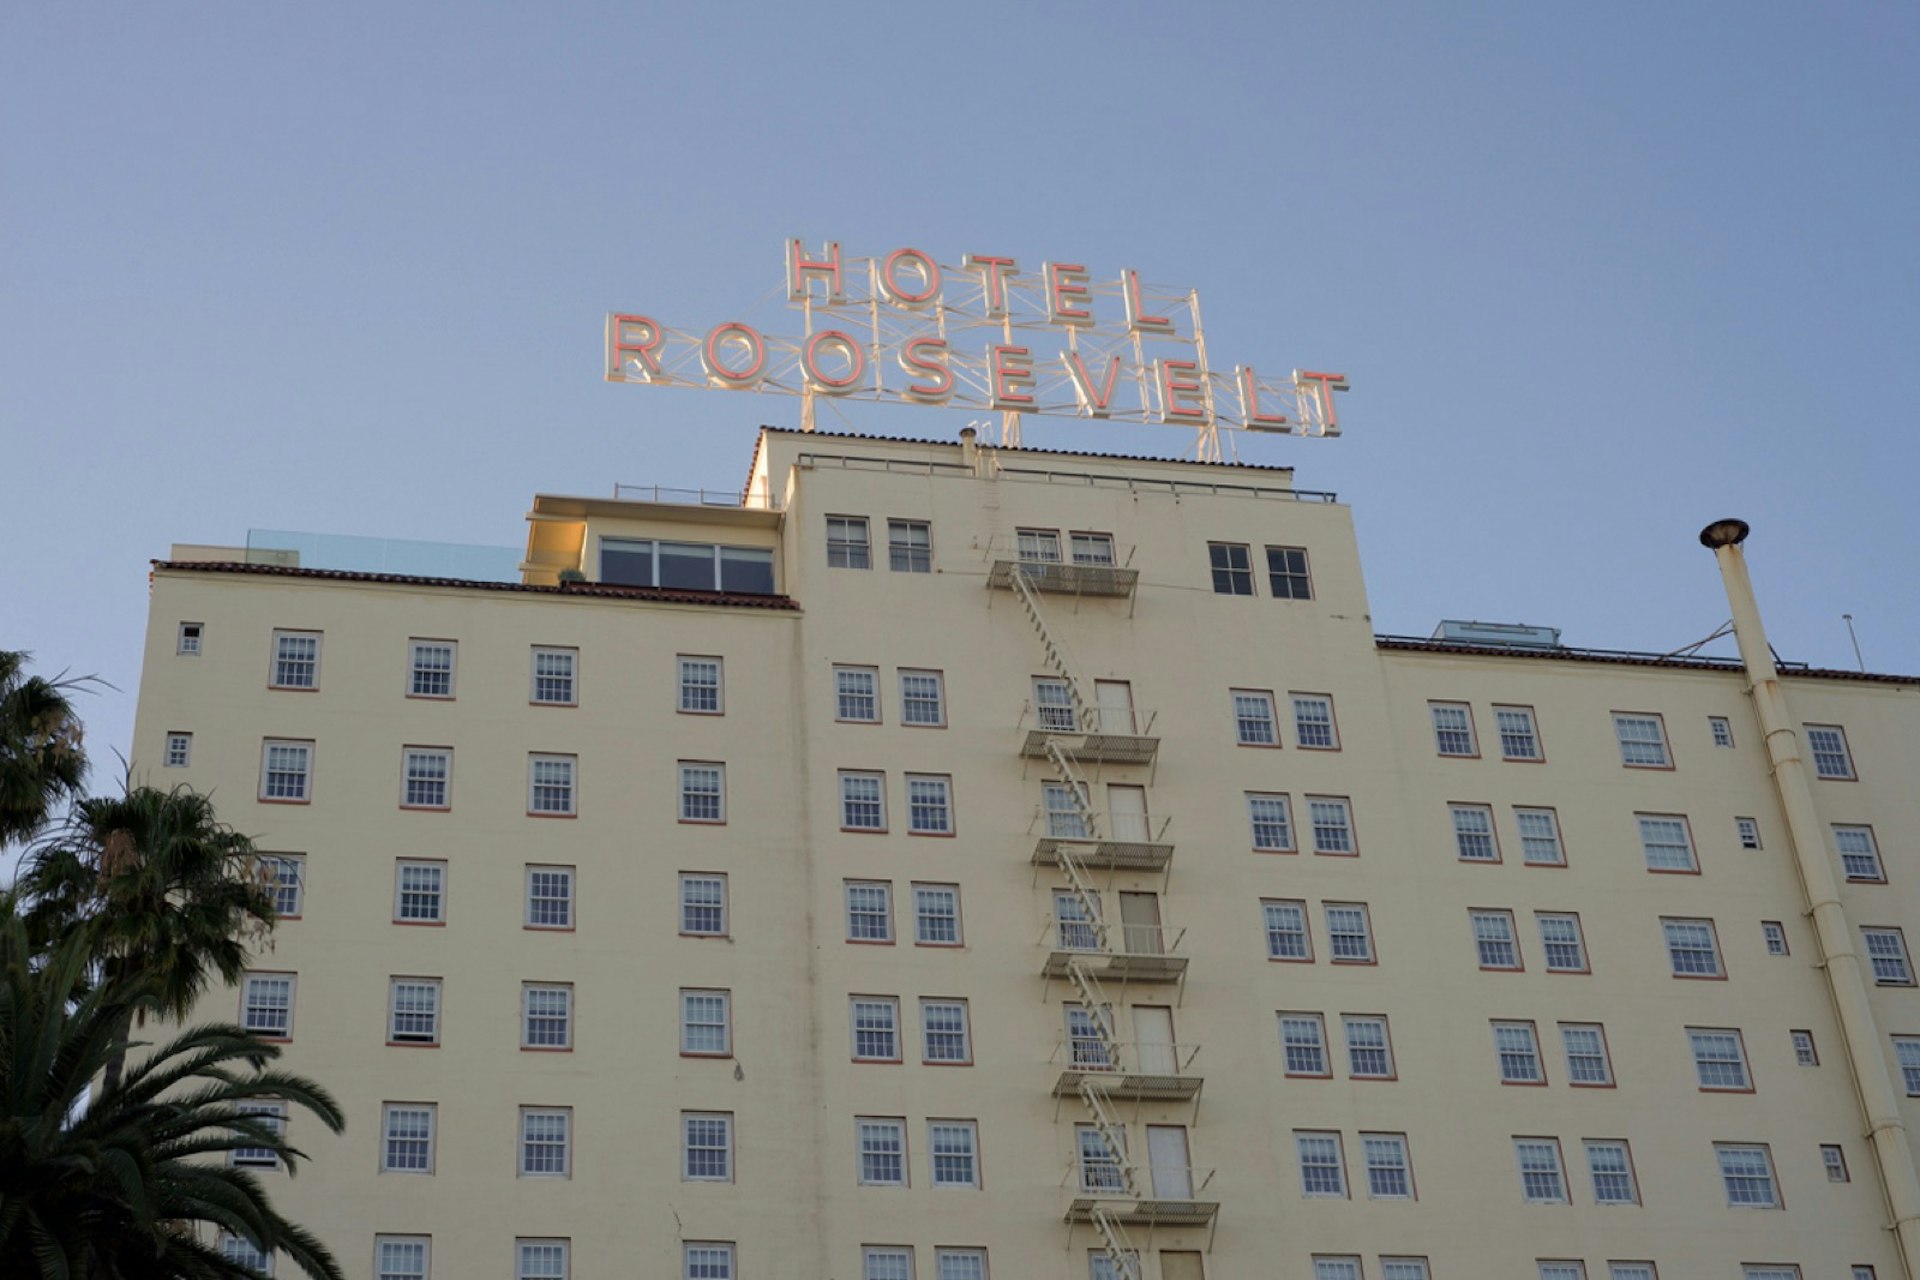 On top of a white hotel building is a neon sign identifying it as the Hotel Roosevelt, but it's daytime so the neon light is not lit; Los Angeles neon